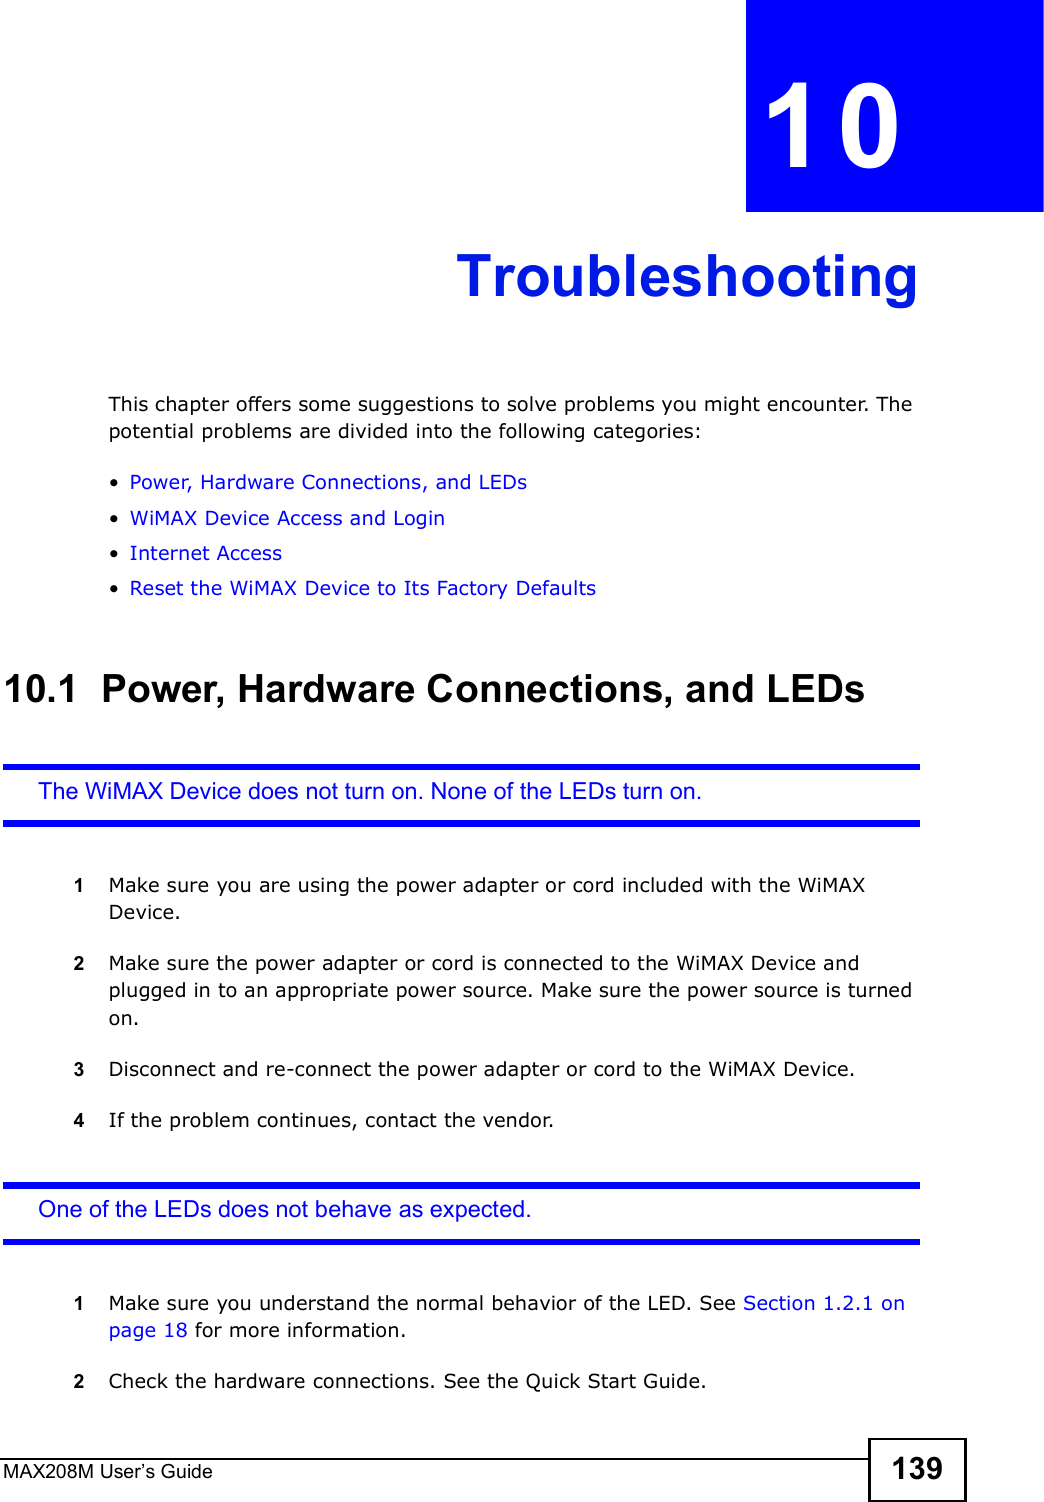 MAX208M User s Guide 139CHAPTER  10 TroubleshootingThis chapter offers some suggestions to solve problems you might encounter. The potential problems are divided into the following categories:!Power, Hardware Connections, and LEDs!WiMAX Device Access and Login!Internet Access!Reset the WiMAX Device to Its Factory Defaults10.1  Power, Hardware Connections, and LEDsThe WiMAX Device does not turn on. None of the LEDs turn on.1Make sure you are using the power adapter or cord included with the WiMAX Device.2Make sure the power adapter or cord is connected to the WiMAX Device and plugged in to an appropriate power source. Make sure the power source is turned on.3Disconnect and re-connect the power adapter or cord to the WiMAX Device.4If the problem continues, contact the vendor.One of the LEDs does not behave as expected.1Make sure you understand the normal behavior of the LED. See Section 1.2.1 on page 18 for more information.2Check the hardware connections. See the Quick Start Guide.